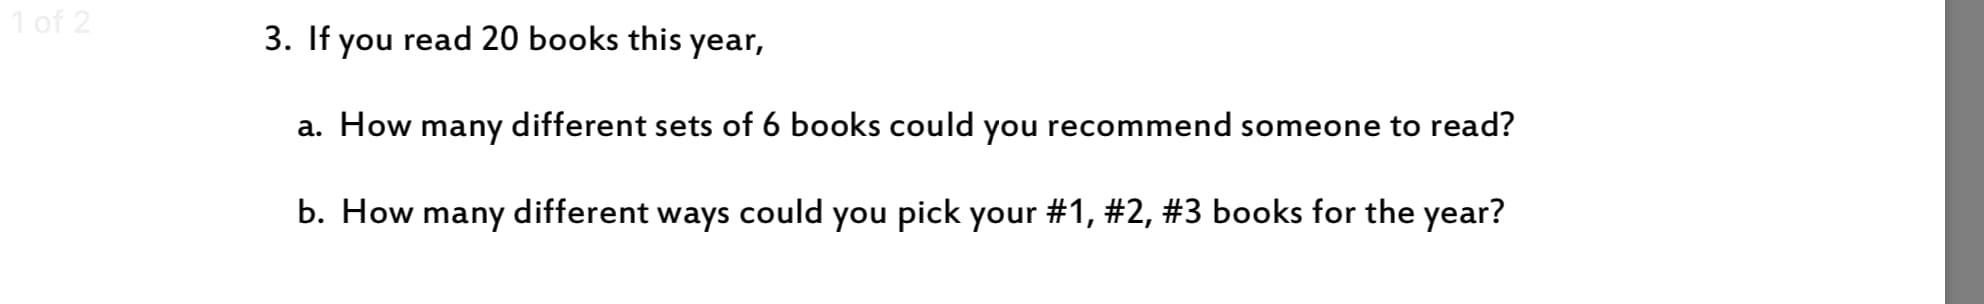 of 2
3. If you read 20 books this year,
a. How many different sets of 6 books could you recommend someone to read?
b. How many different ways could you pick your #1, #2, #3 books for the year?
